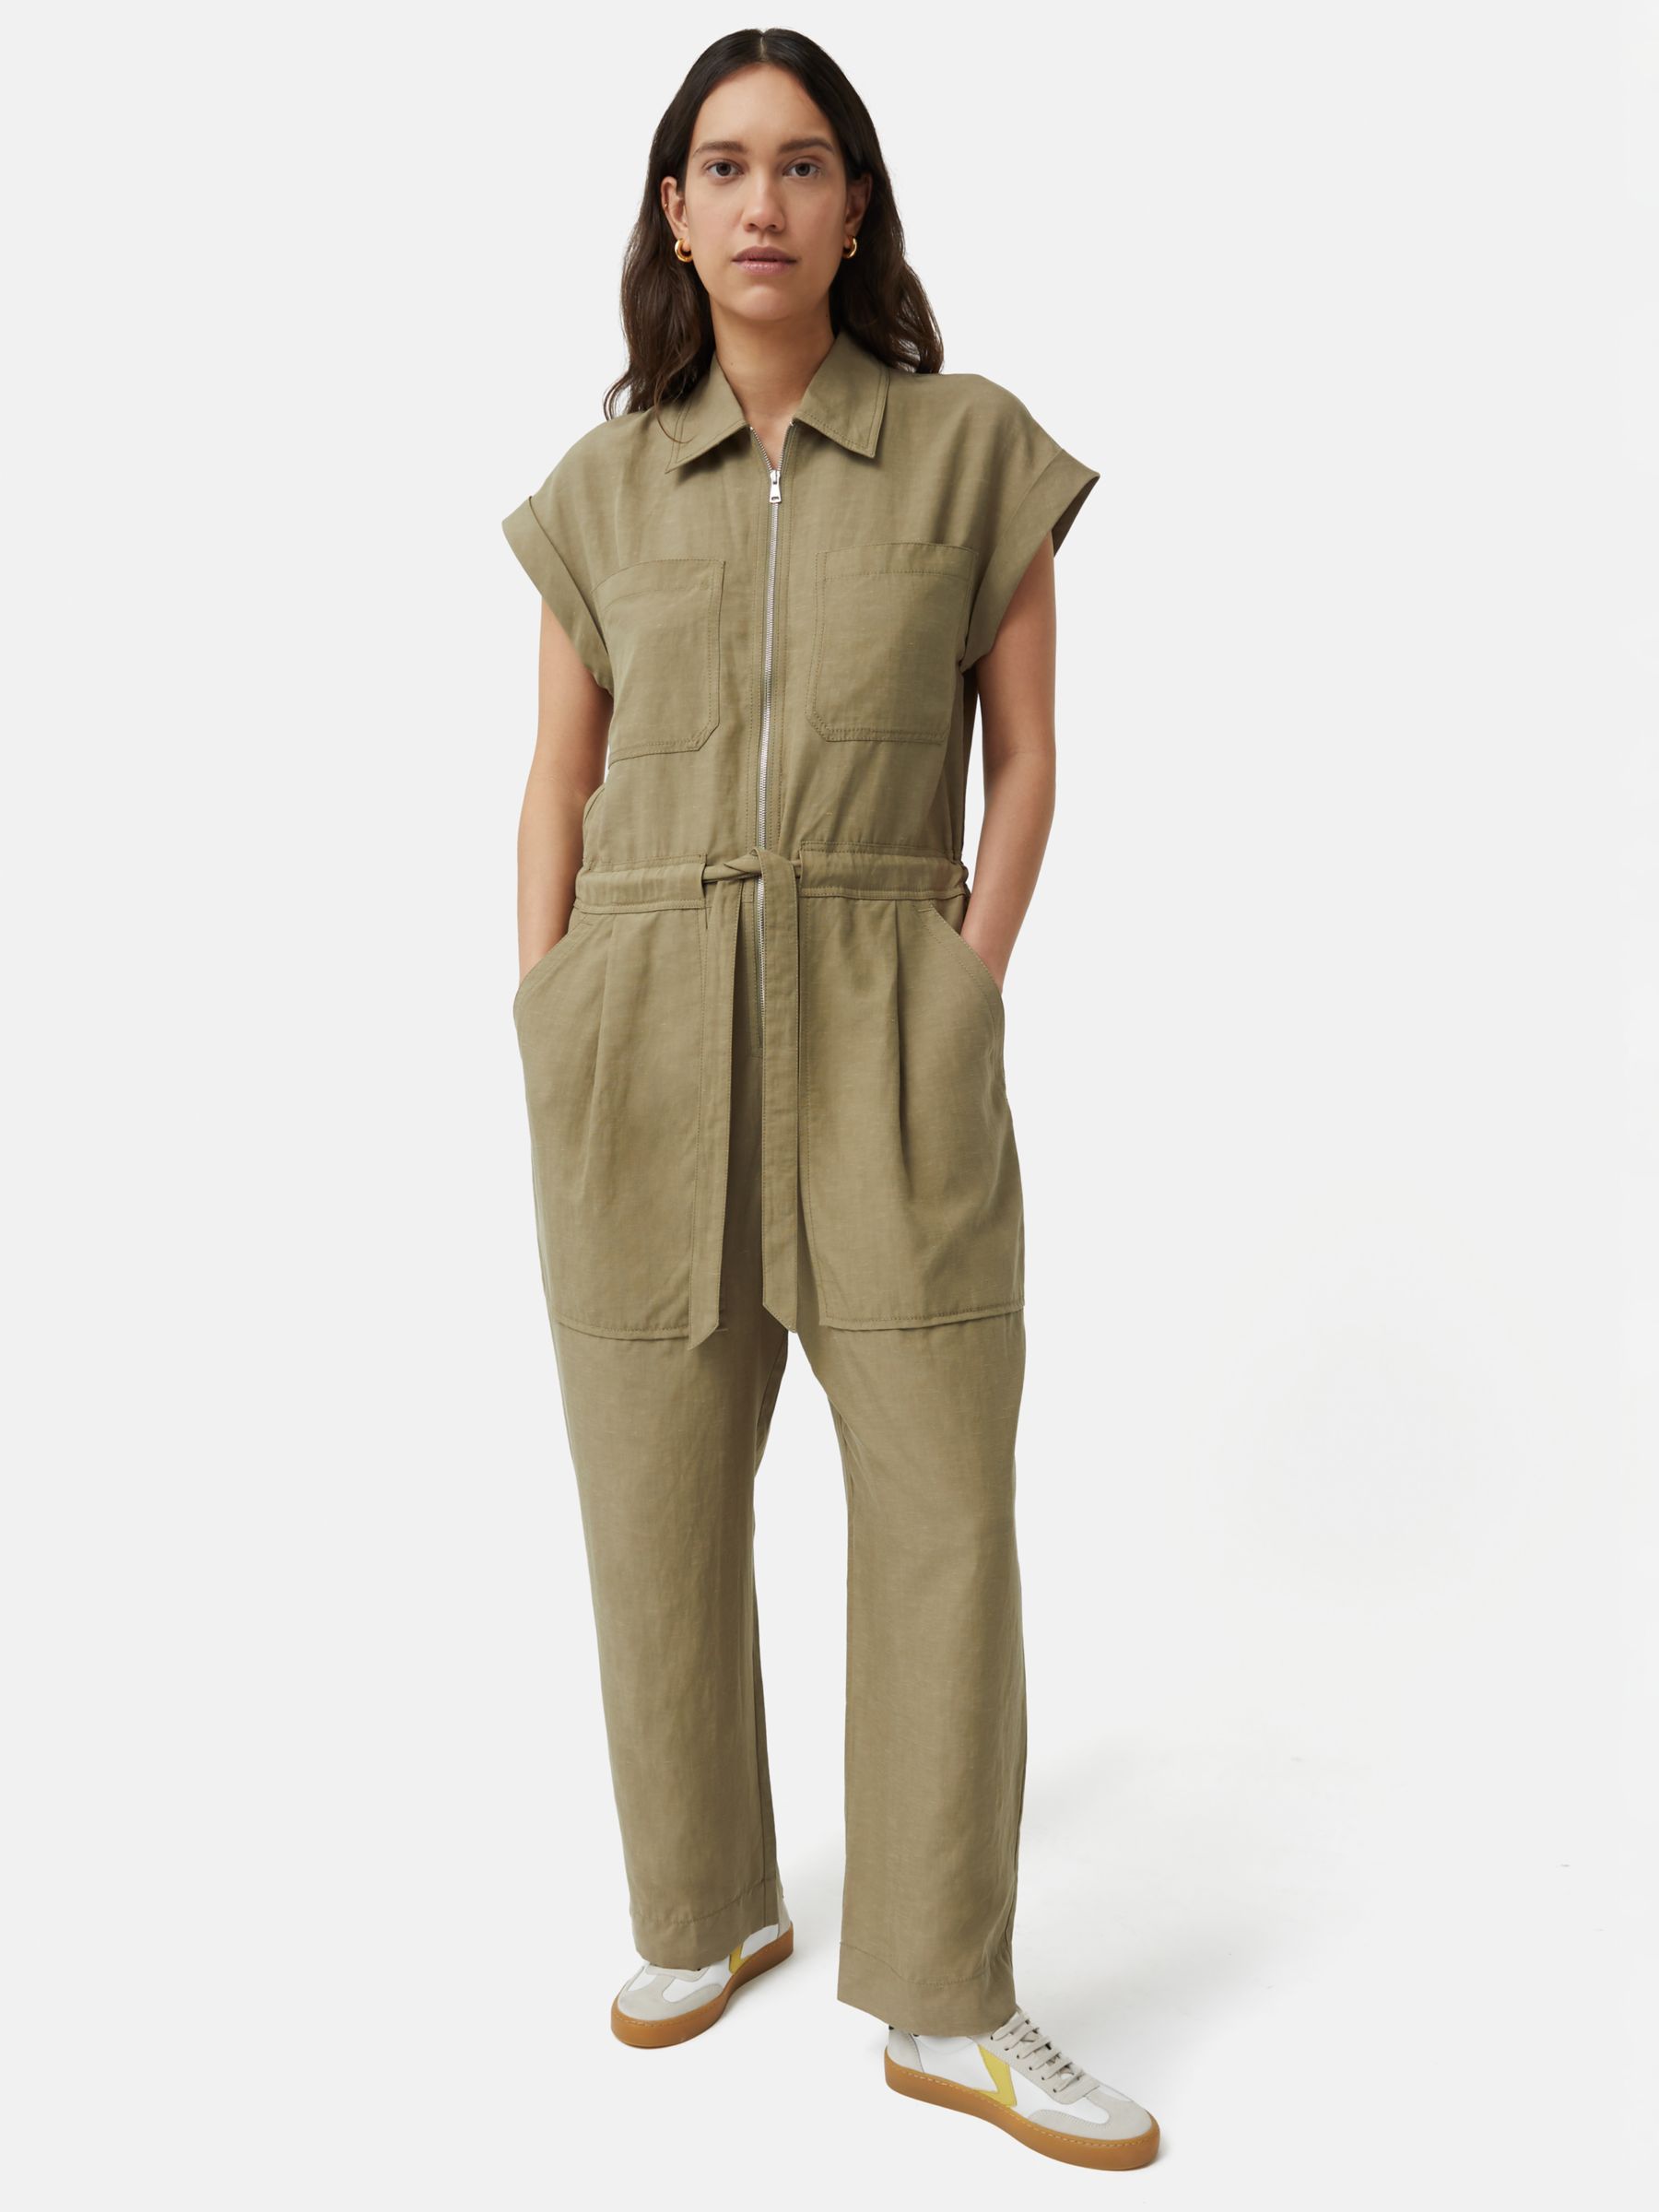 Jumpsuits For Women - Buy Jumpsuits For Women Online Starting at